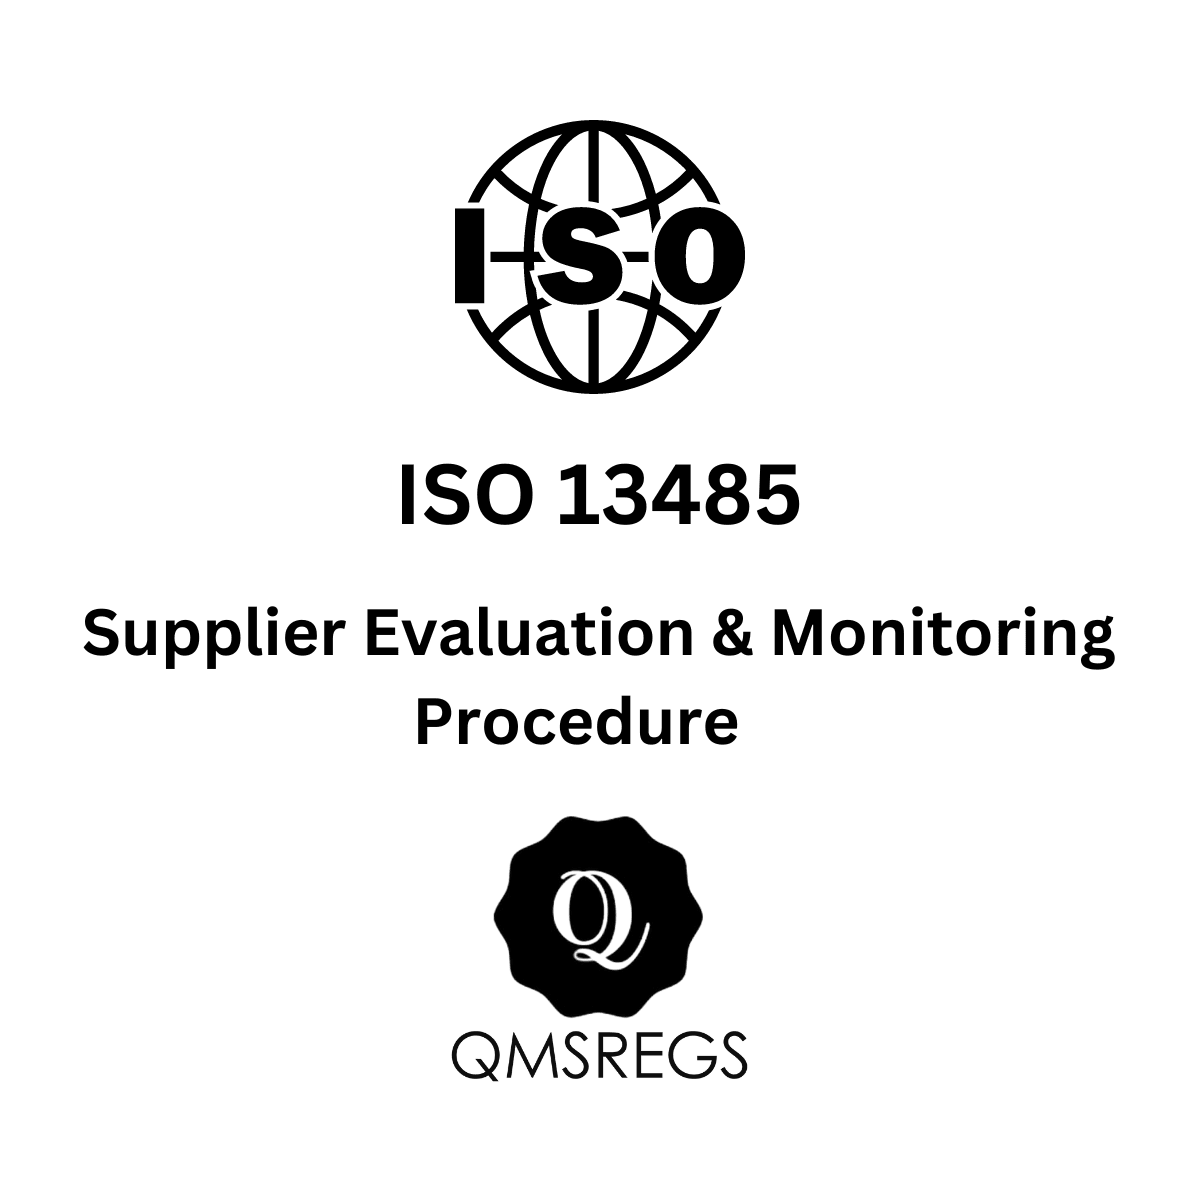 ISO 13485 Supplier Evaluation and Monitoring Procedure Template